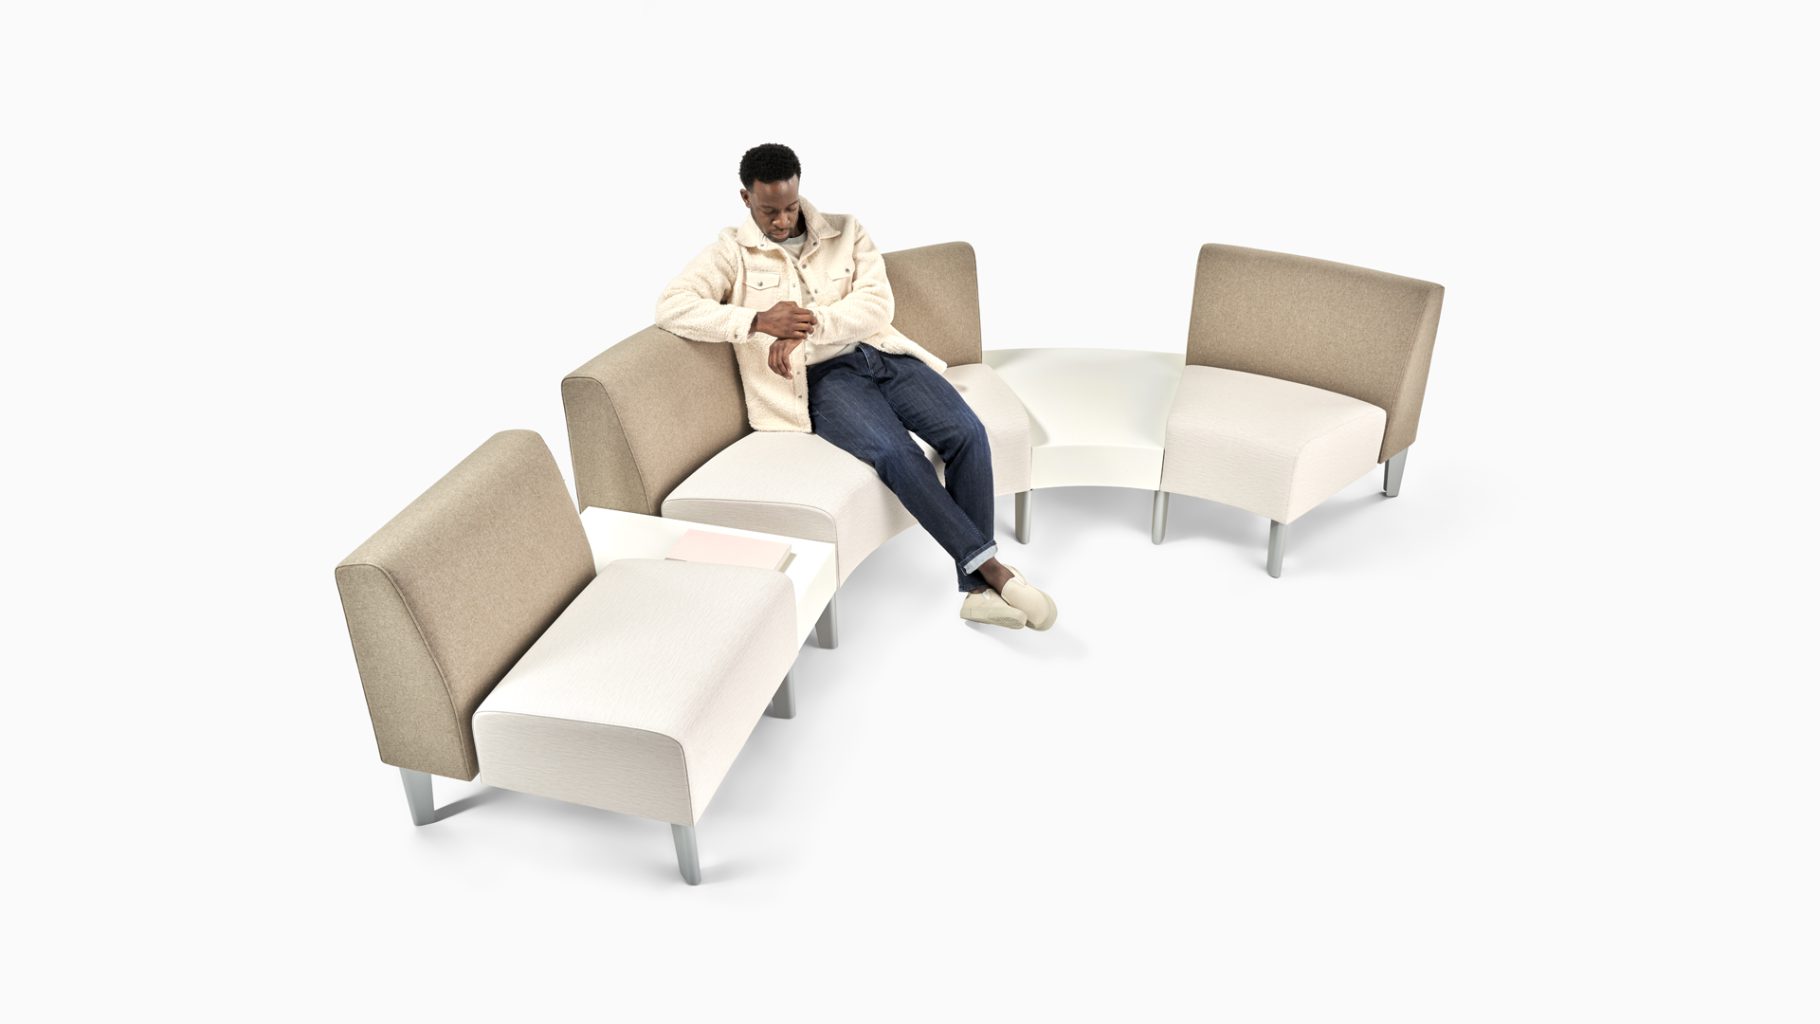 Avila configuration featuring a lounge chair, single depth table, inside quarter, wide wedge table, and inside wedge.